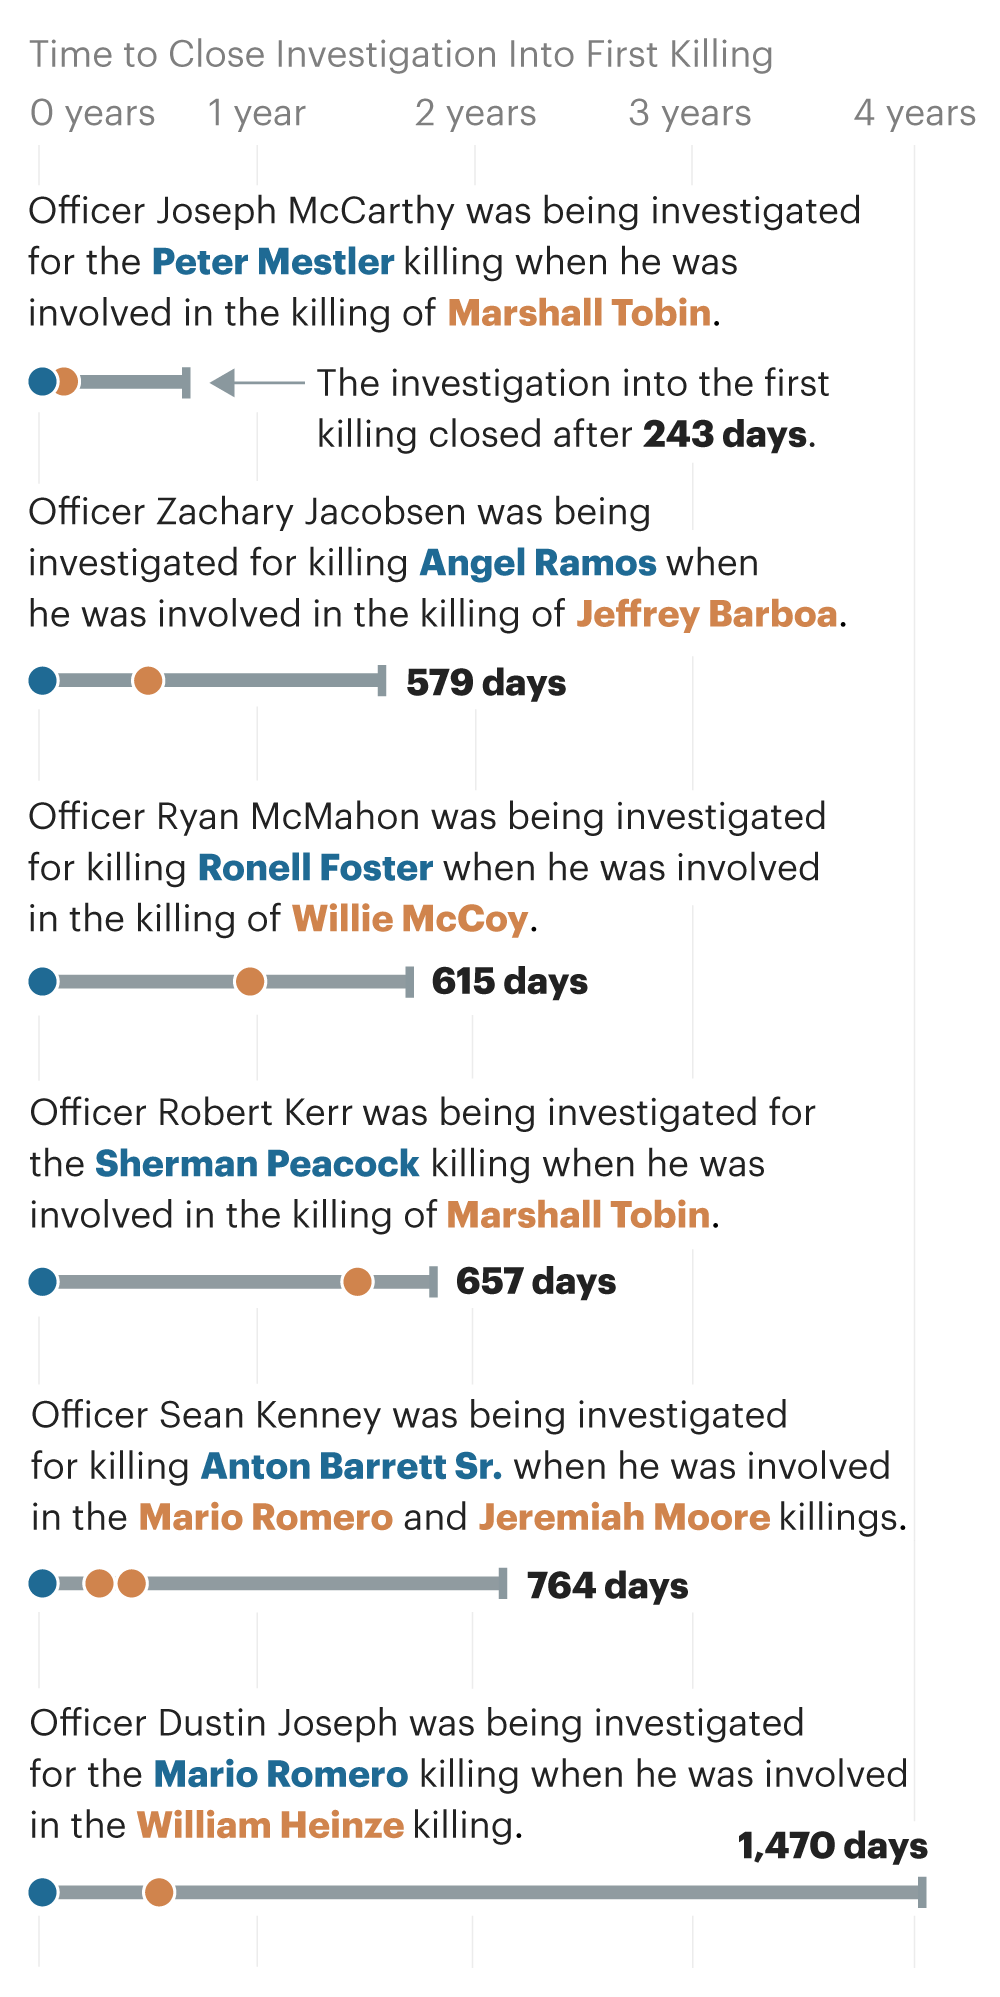 A chart that reads: Officer Joseph McCarthy was being investigated for the Peter Mestler killing when he was involved in the killing of Marshall Tobin. The investigation into the first killing closed after 243 days. Officer Zachary Jacobsen was being investigated for killing Angel Ramos when he was involved in the killing of Jeffrey Barboa. (579 days) Officer Ryan McMahon was being investigated for killing Ronell Foster when he was involved in the killing of Willie McCoy. (615 days) Officer Robert Kerr was being investigated for the Sherman Peacock killing when he was involved in the killing of Marshall Tobin. (657 days) Officer Sean Kenney was being investigated for killing Anton Barrett Sr. when he was involved in the Mario Romero and Jeremiah Moore killings. (764 days) Officer Dustin Joseph was being investigated for the Mario Romero killing when he was involved in the William Heinze killing. (1,470 days)